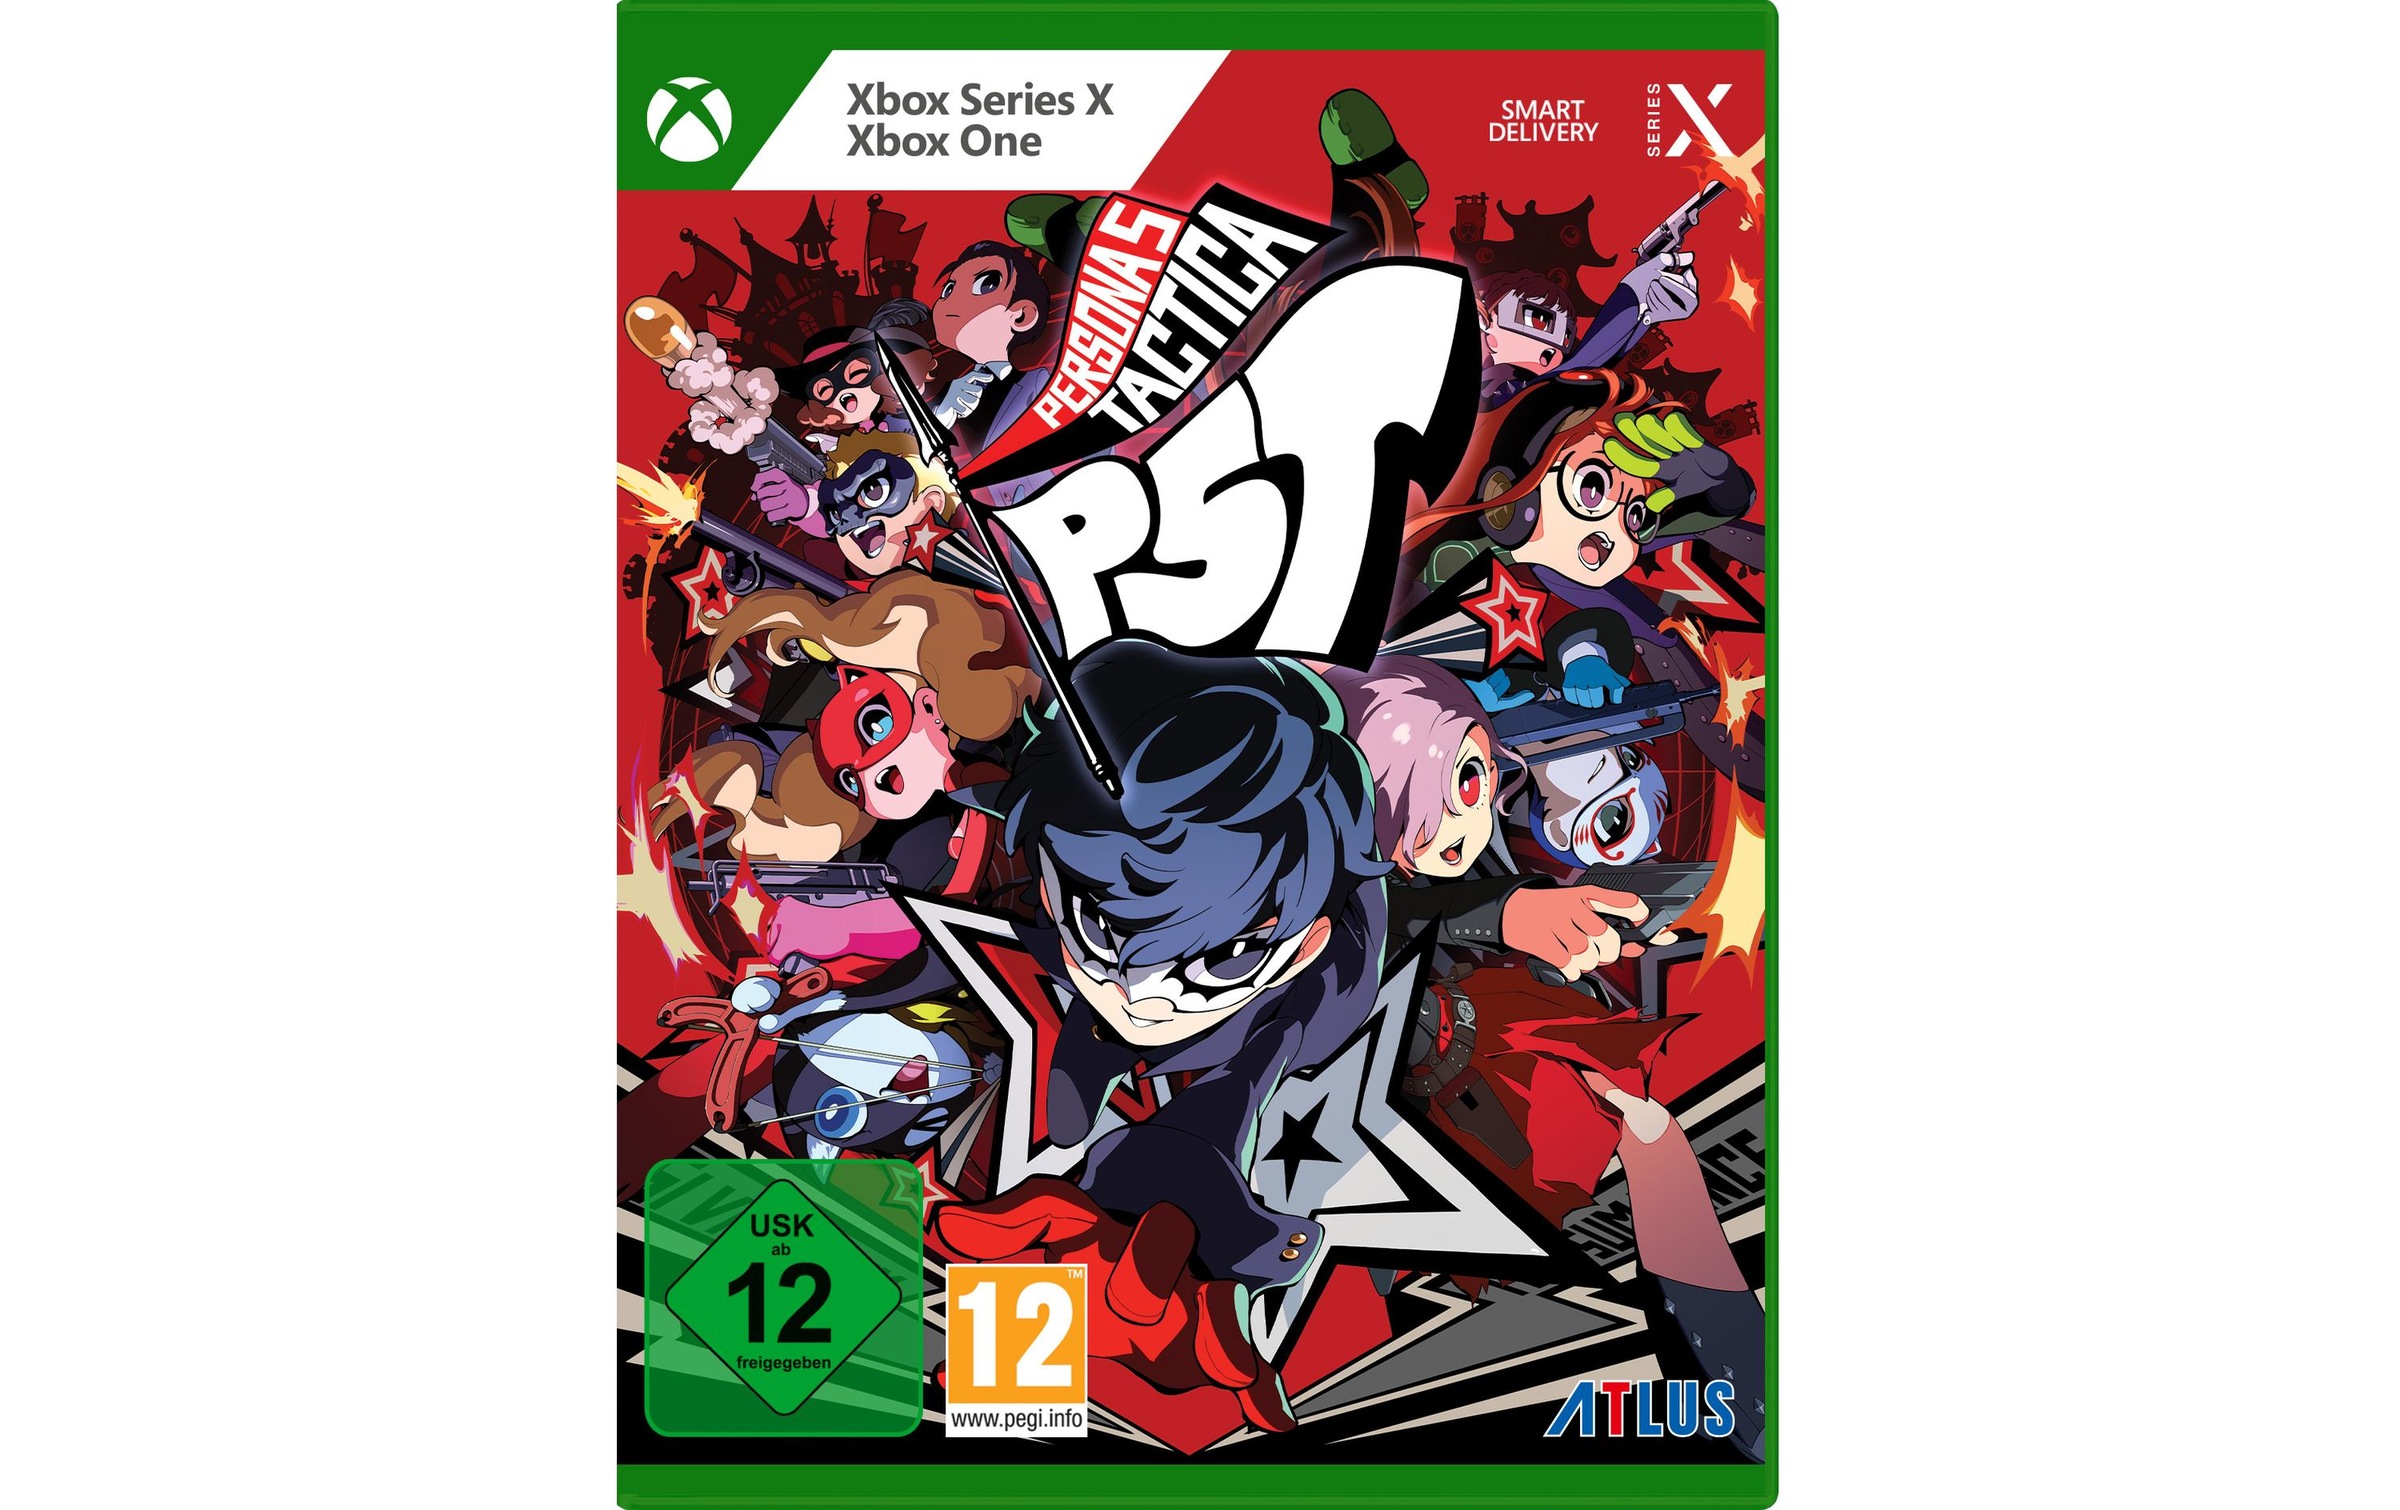 Spielesoftware »GAME Persona 5 Tactica«, Xbox One-Xbox Series X